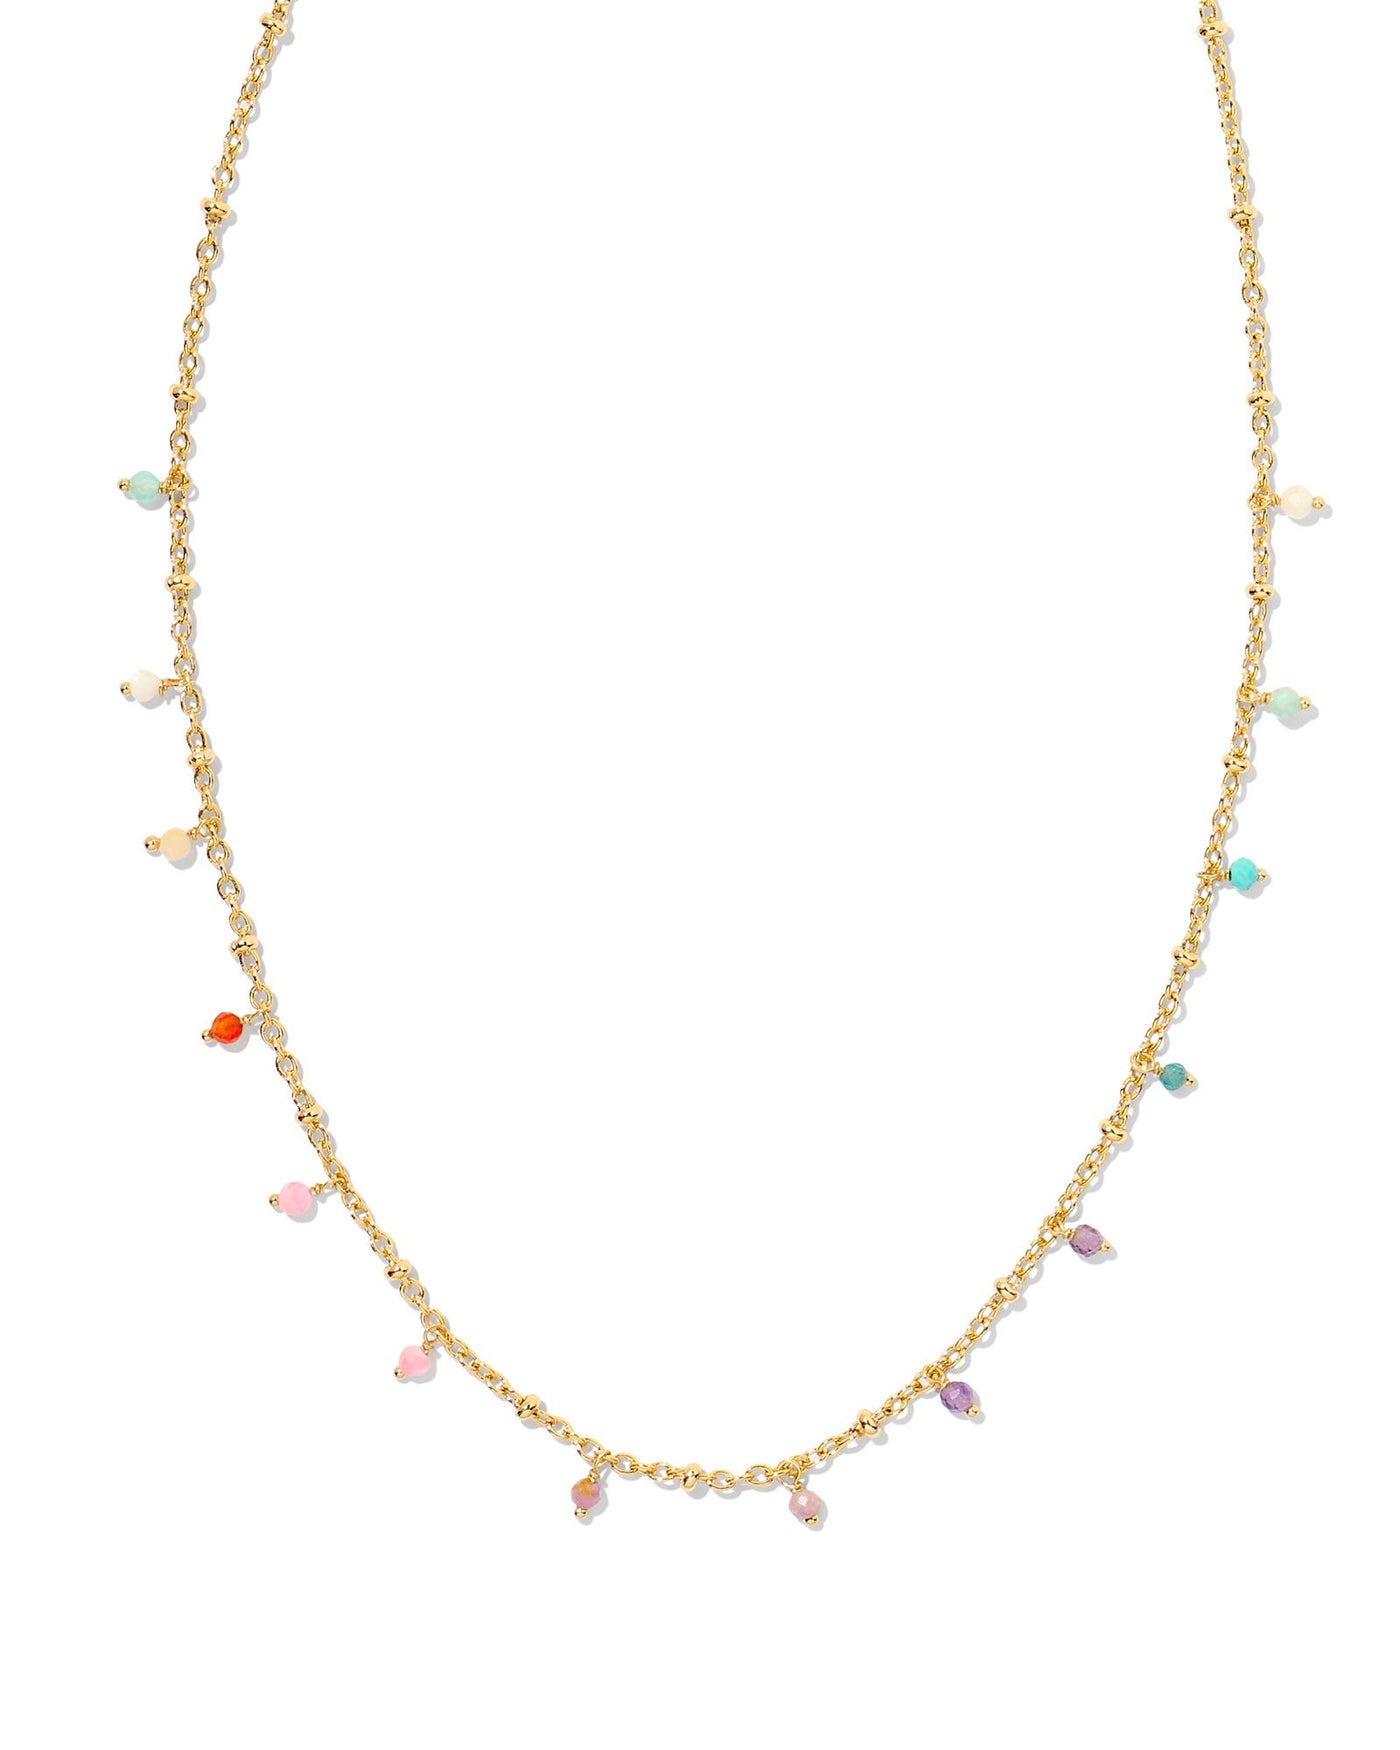 Kendra Scott Camry Beaded Strand Necklace-Necklaces-Kendra Scott-Market Street Nest, Fashionable Clothing, Shoes and Home Décor Located in Mabank, TX